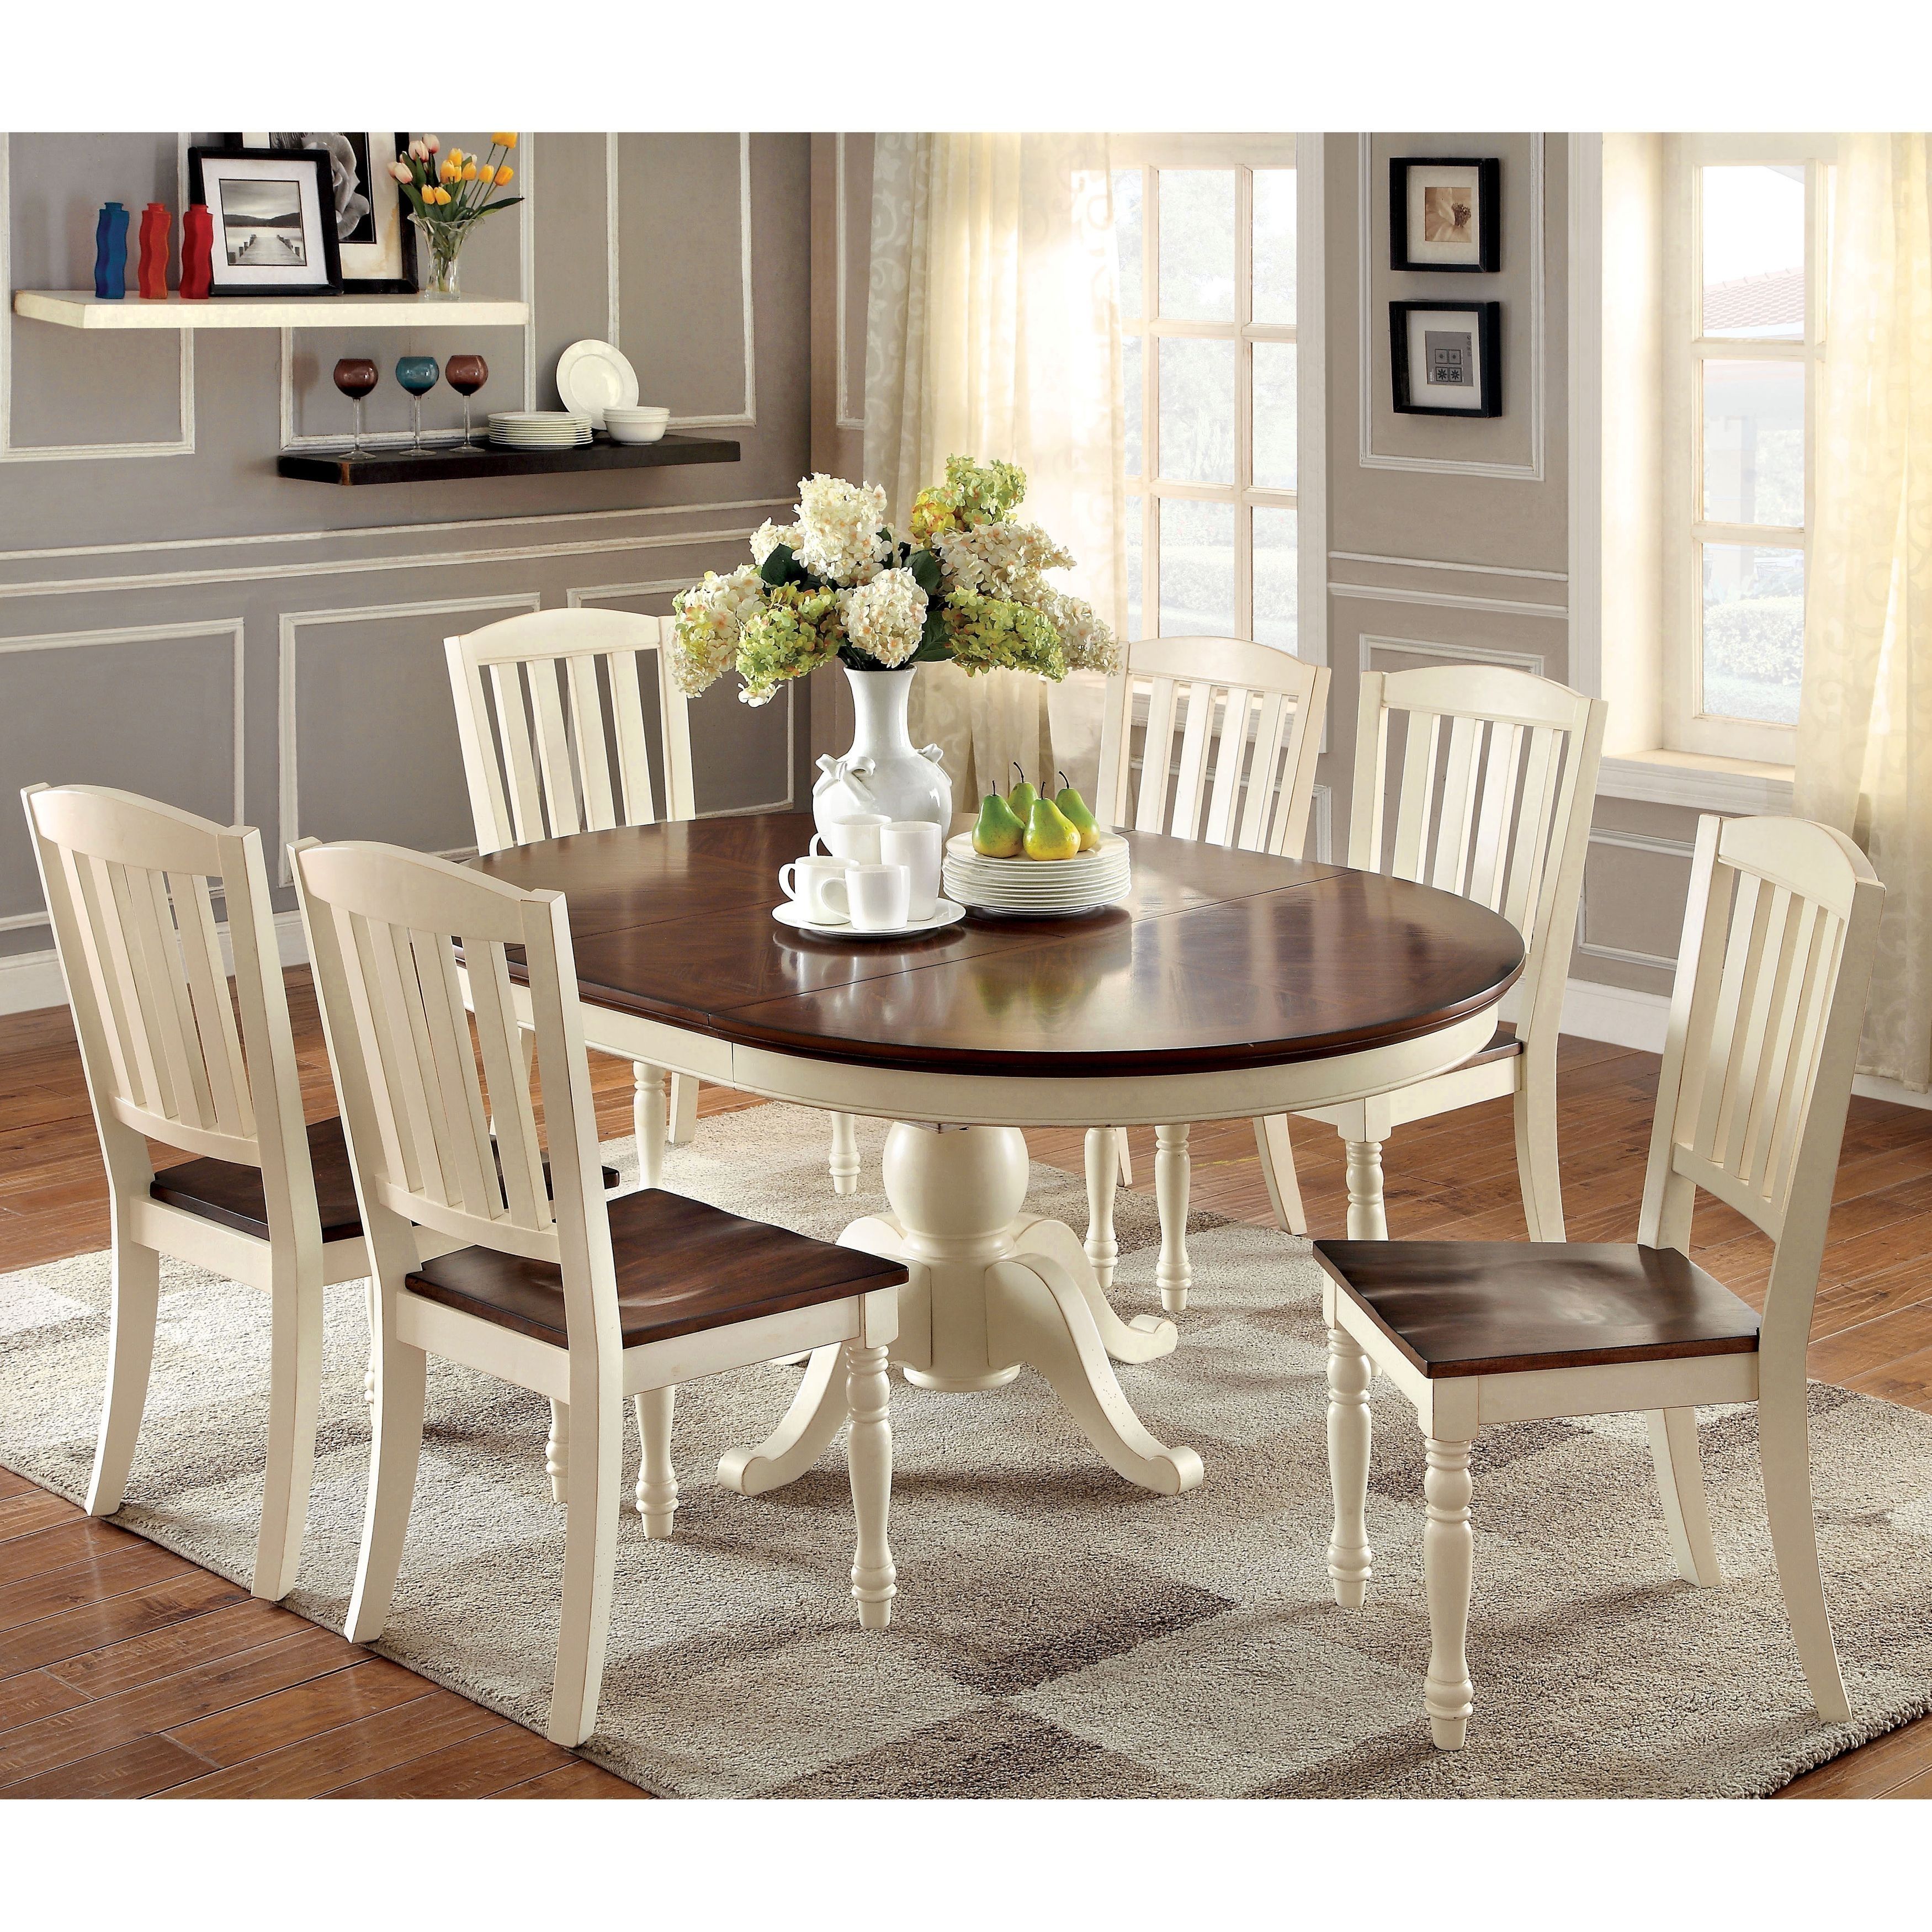 Furniture Of America Bethannie 7 Piece Cottage Style Oval Dining Set Inside 2018 Kirsten 6 Piece Dining Sets (View 2 of 20)